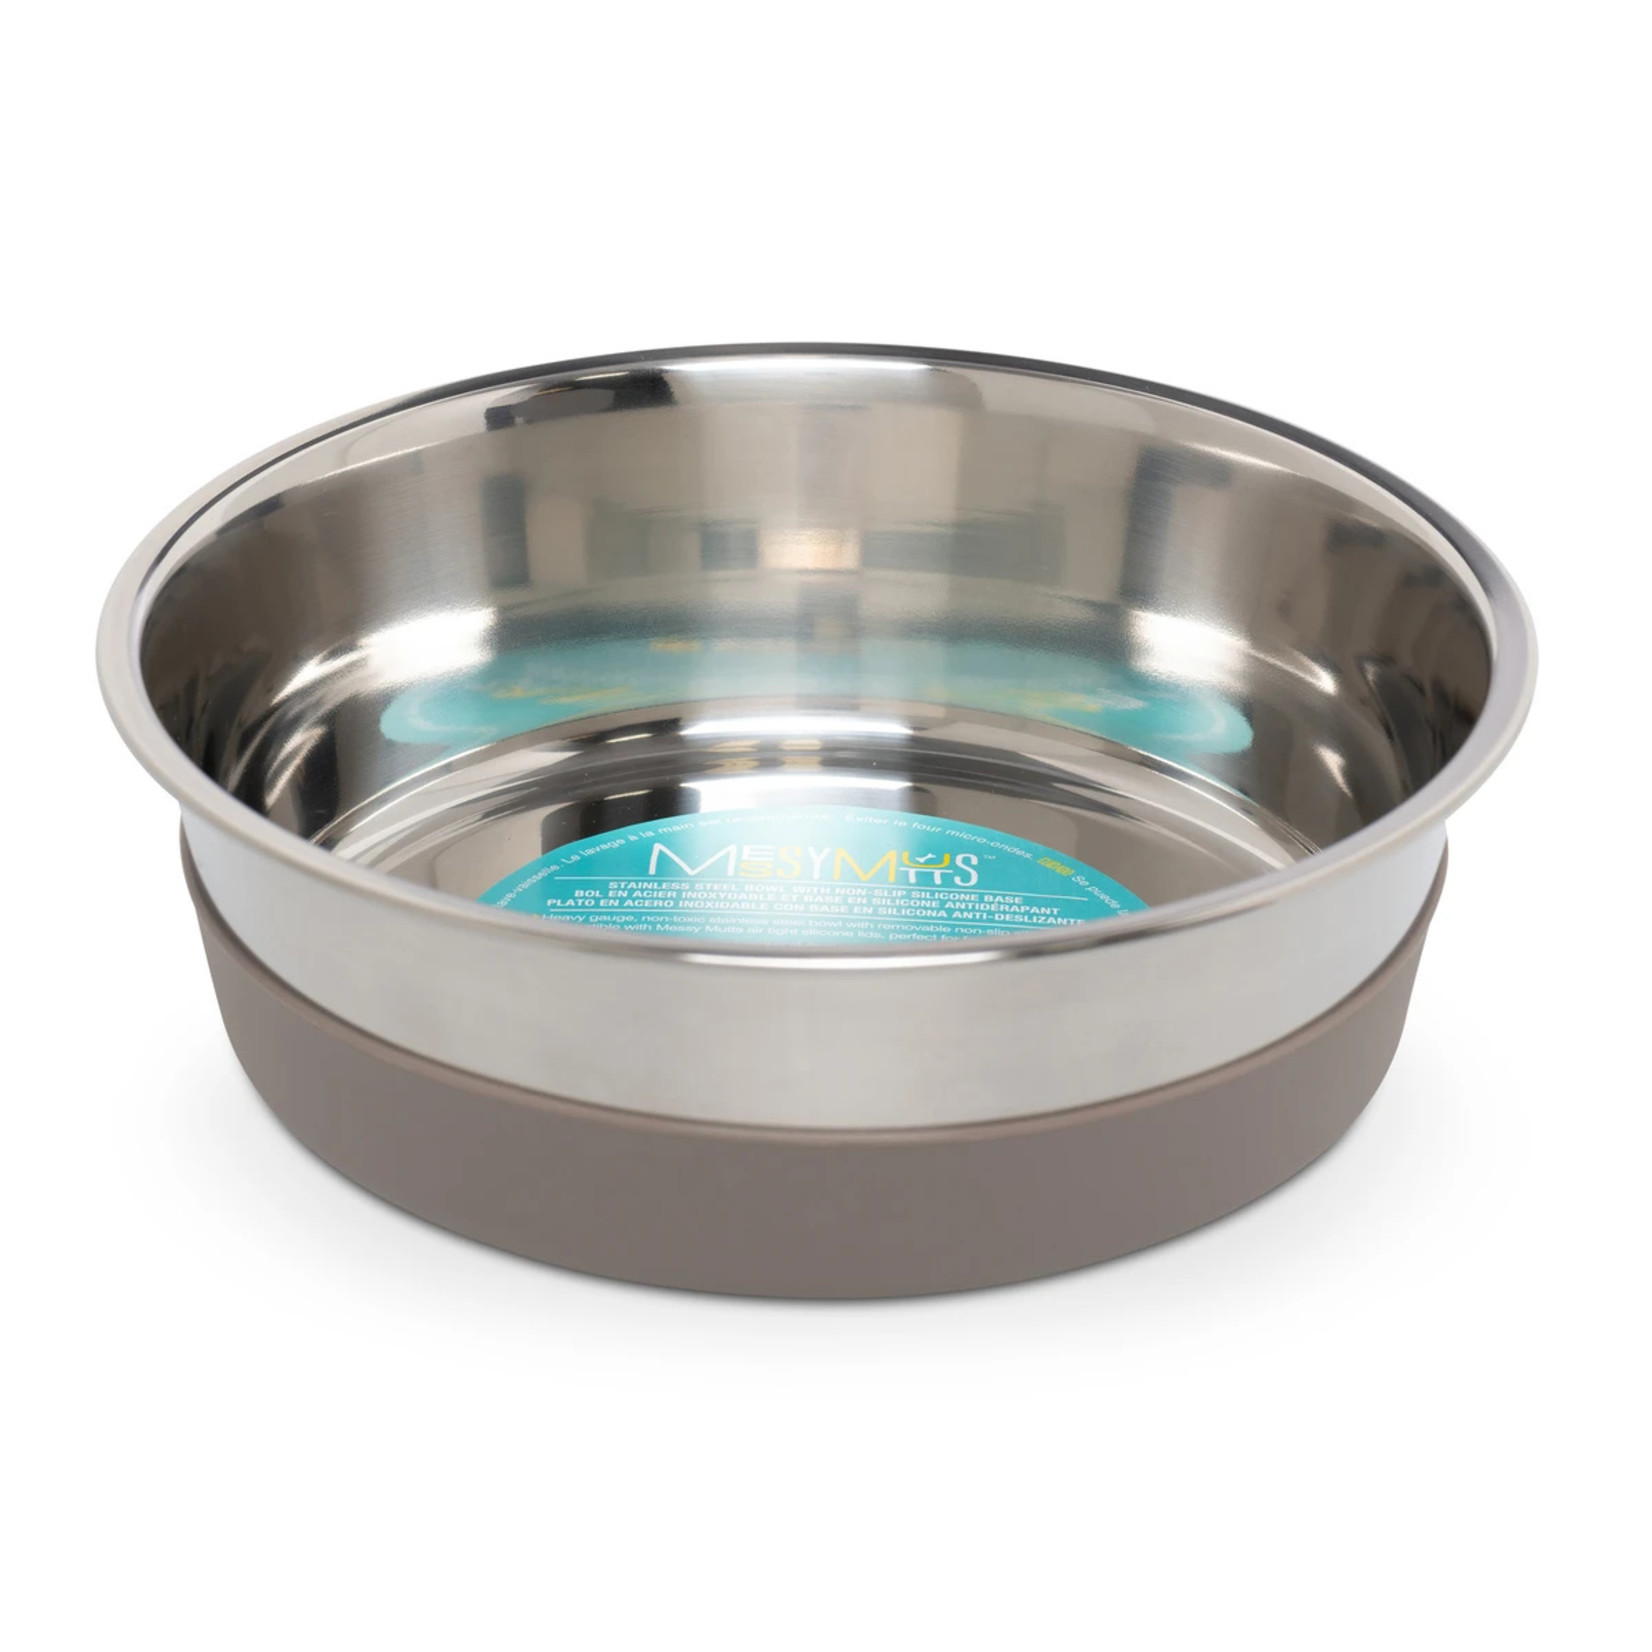 Messy Mutts Messy Mutts Stainless Steel Heavy Gauge Bowl with Non-Slip Removable Silicone Base